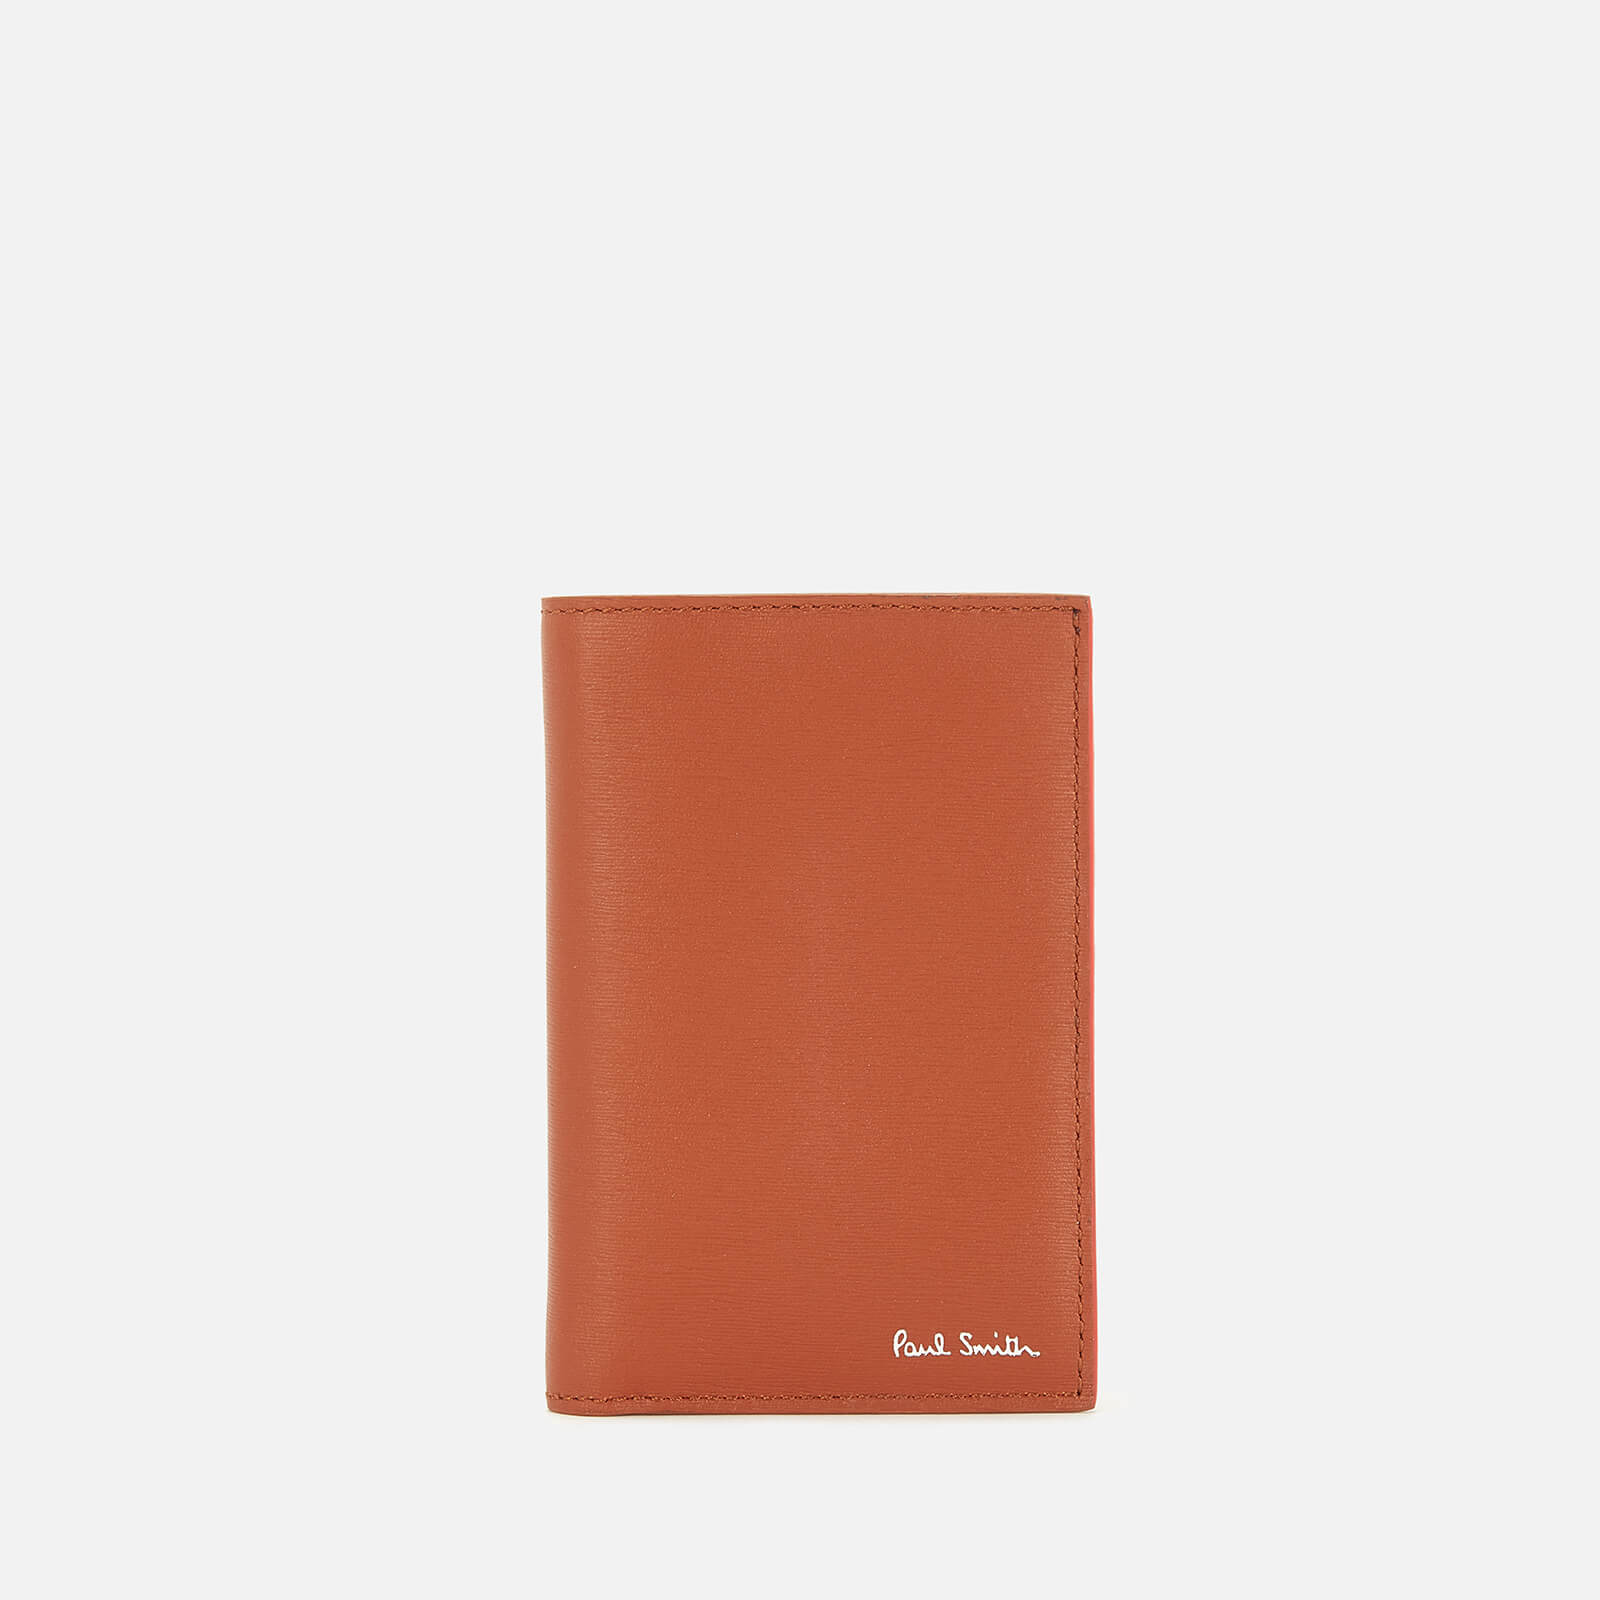 PS Paul Smith Men's Leather Credit Card Wallet - Tan